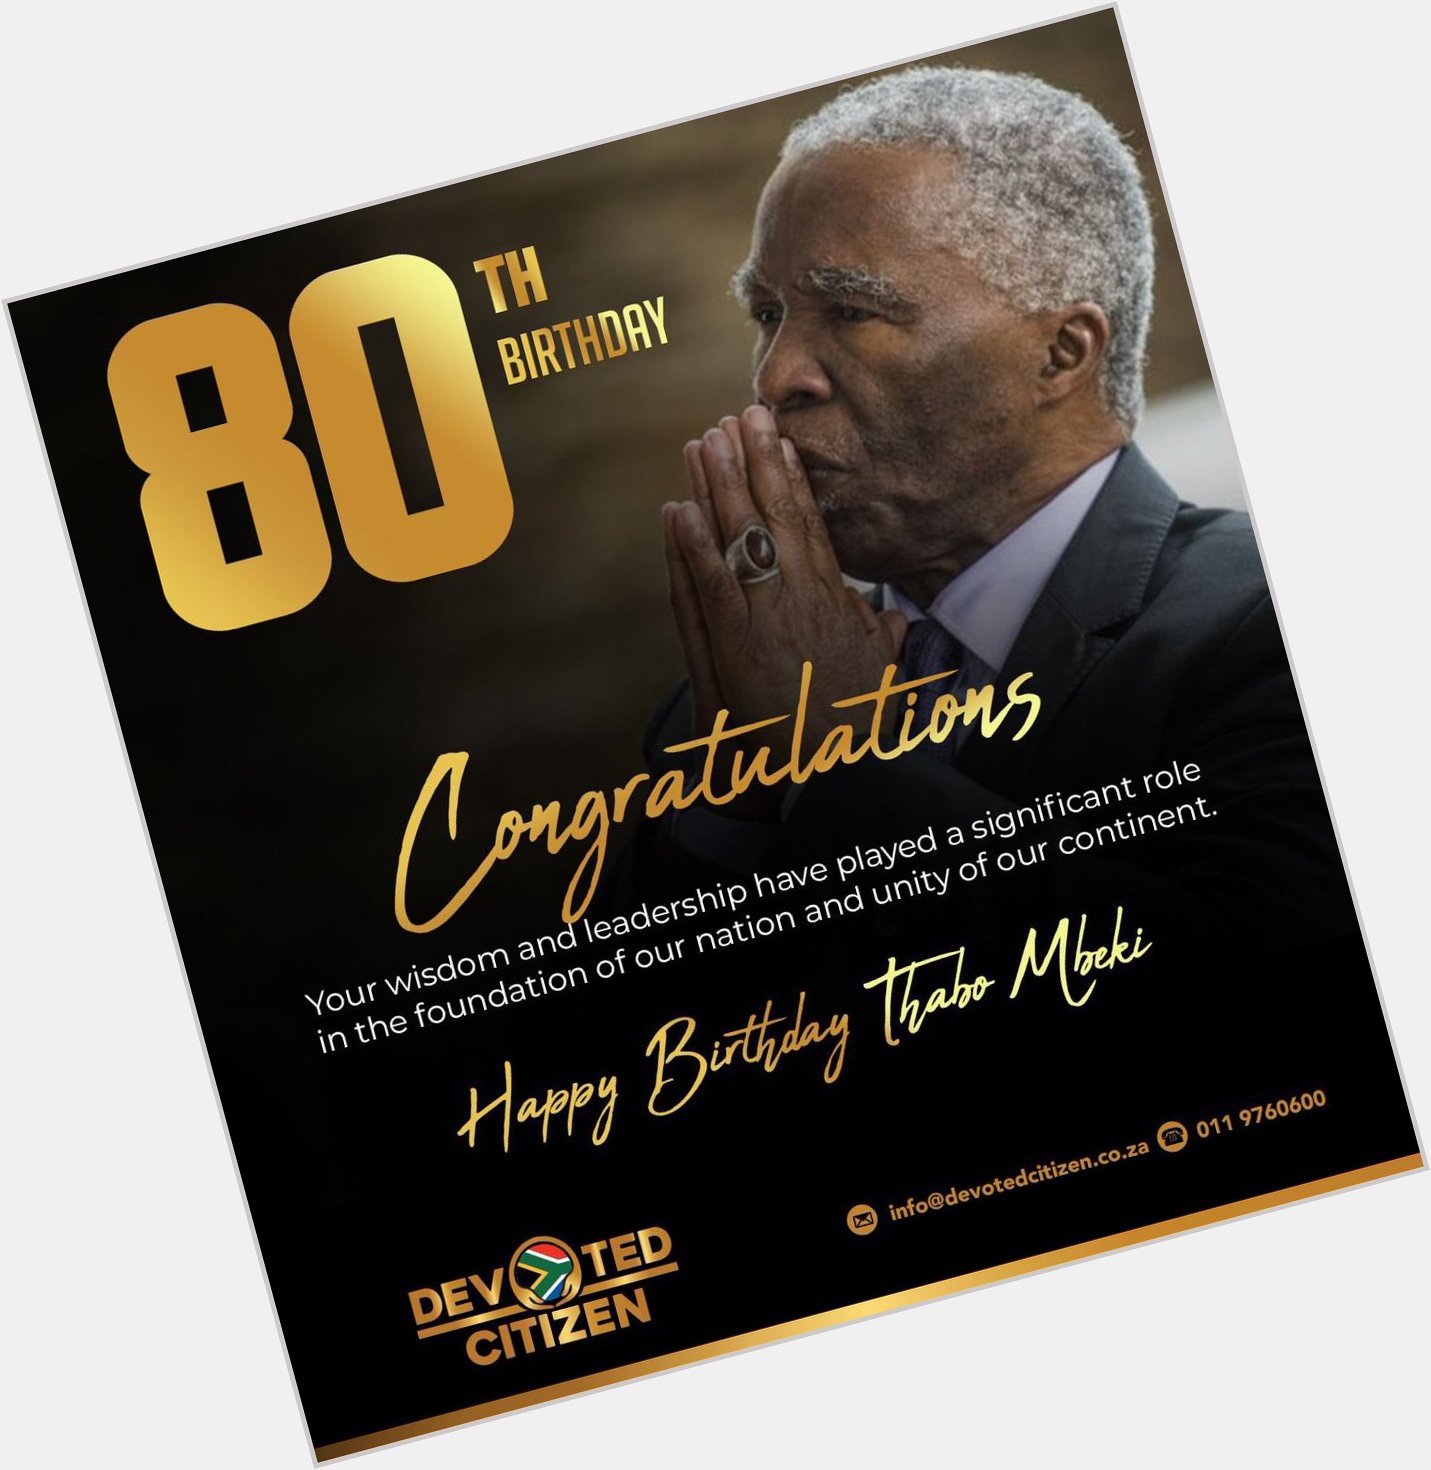 Happy Birthday Thabo Mbeki. May the Lord add more fruitful years to your life! 